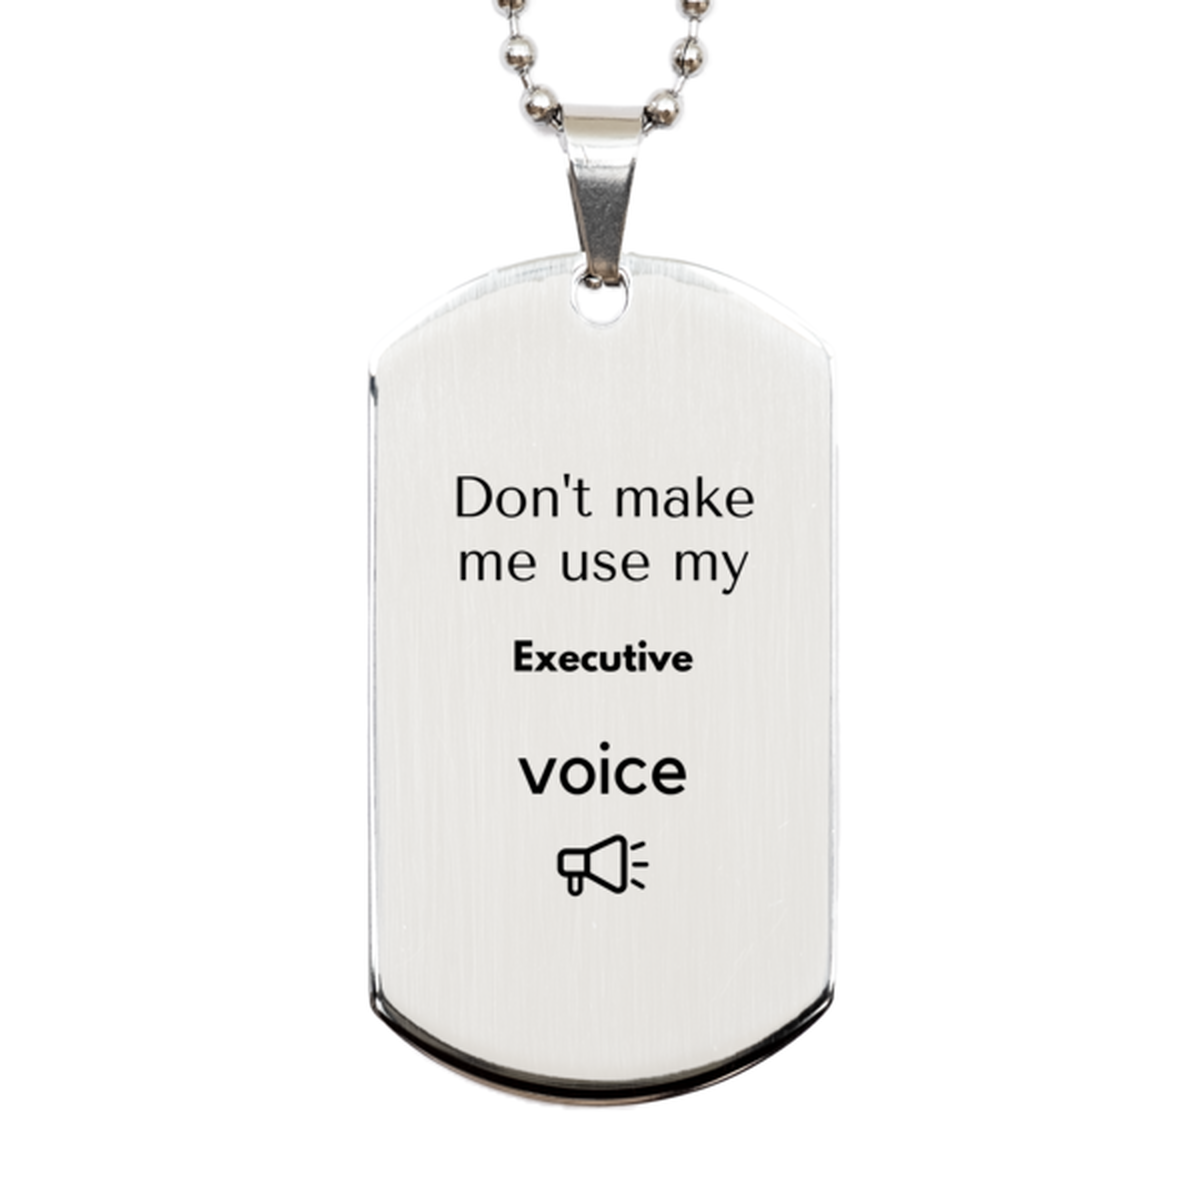 Don't make me use my Executive voice, Sarcasm Executive Gifts, Christmas Executive Silver Dog Tag Birthday Unique Gifts For Executive Coworkers, Men, Women, Colleague, Friends